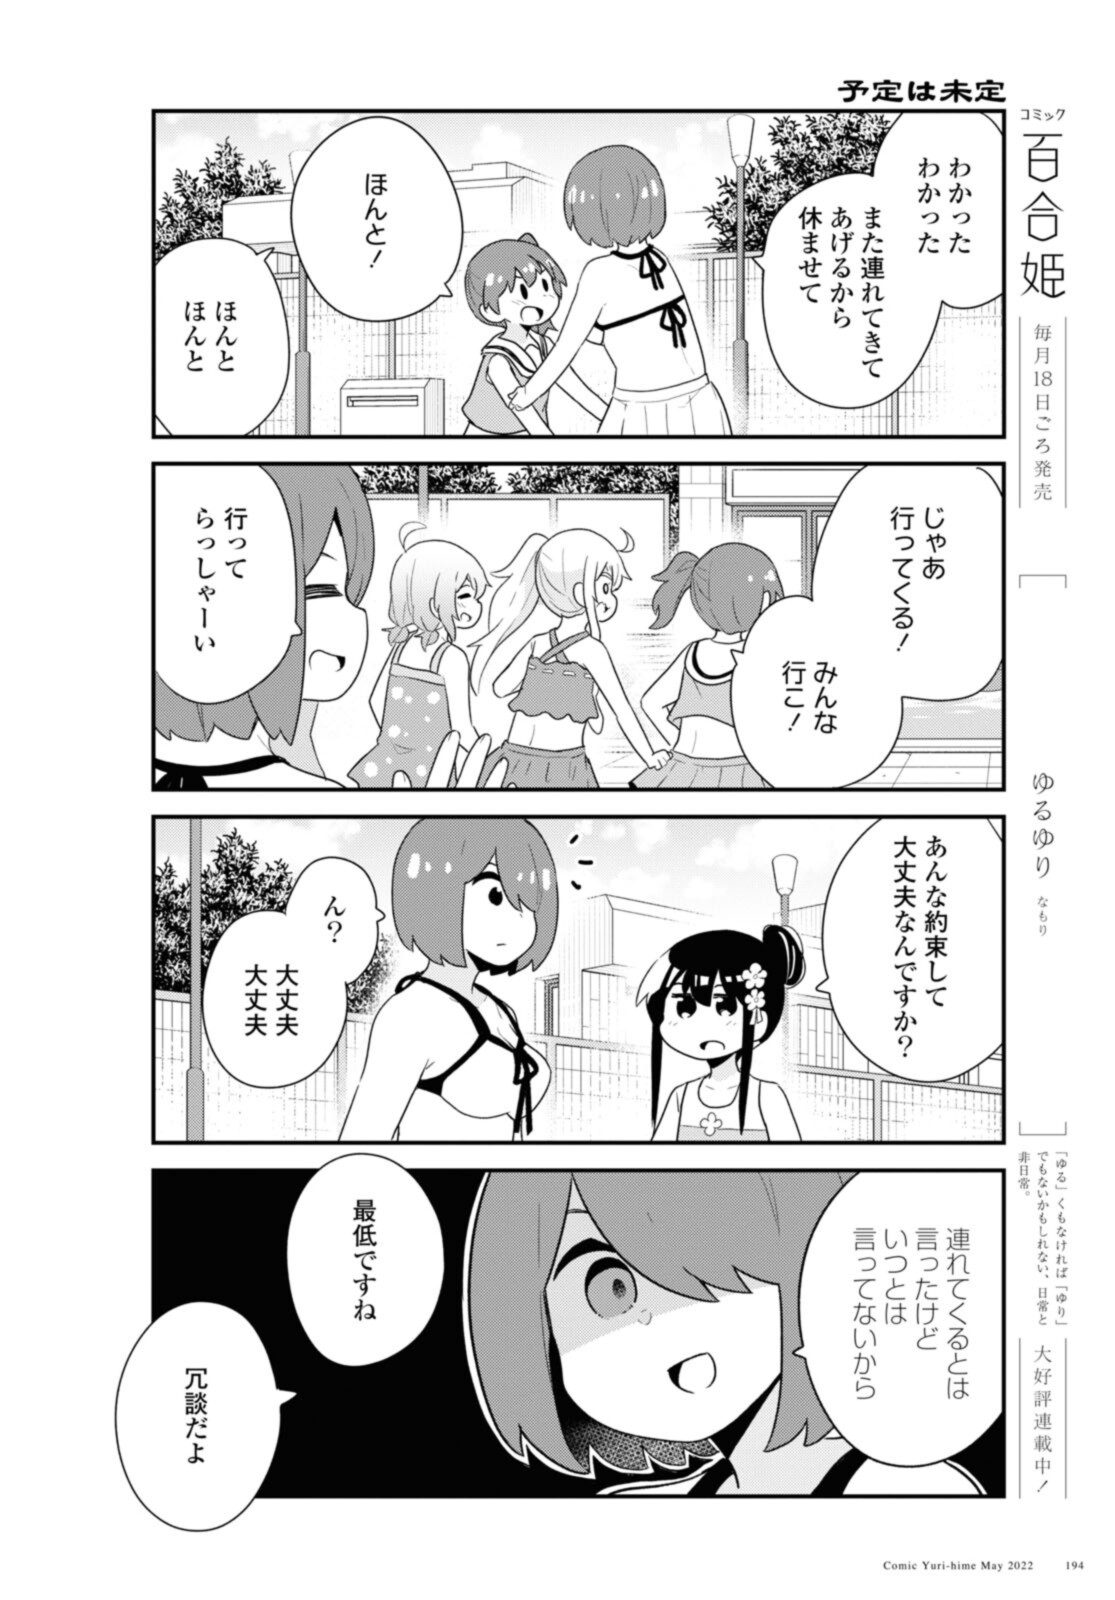 Wataten! An Angel Flew Down to Me 私に天使が舞い降りた！ 第95話 - Page 12